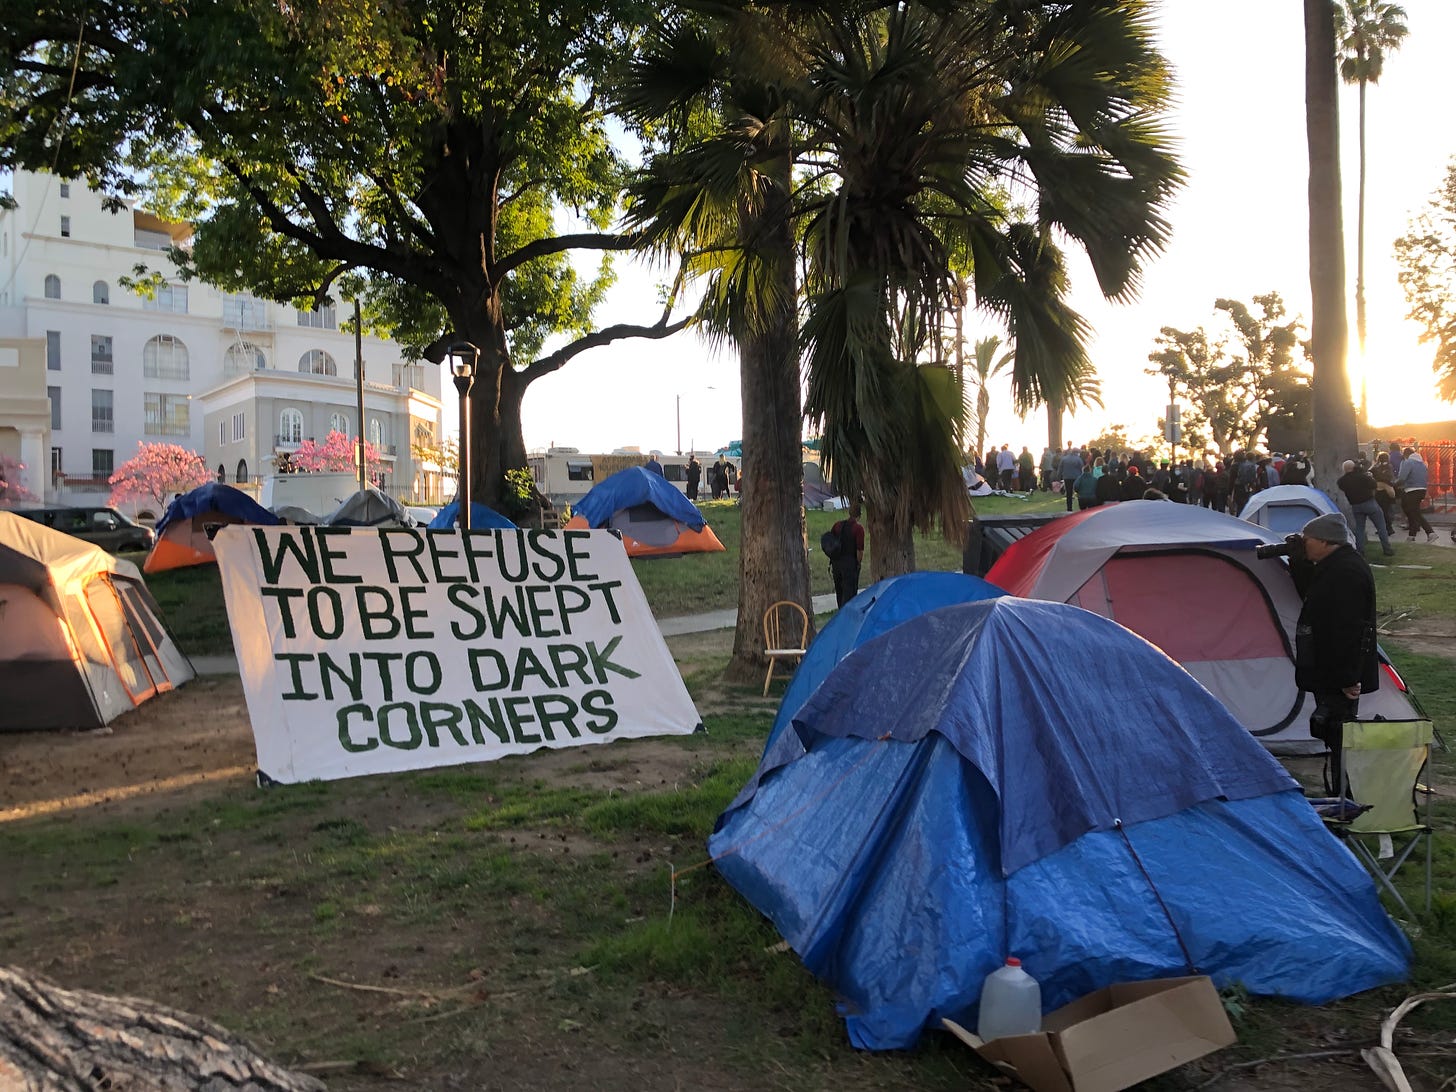 Tents in the park, and a sign that reads "WE REFUSE TO BE SWEPT INTO DARK CORNERS"